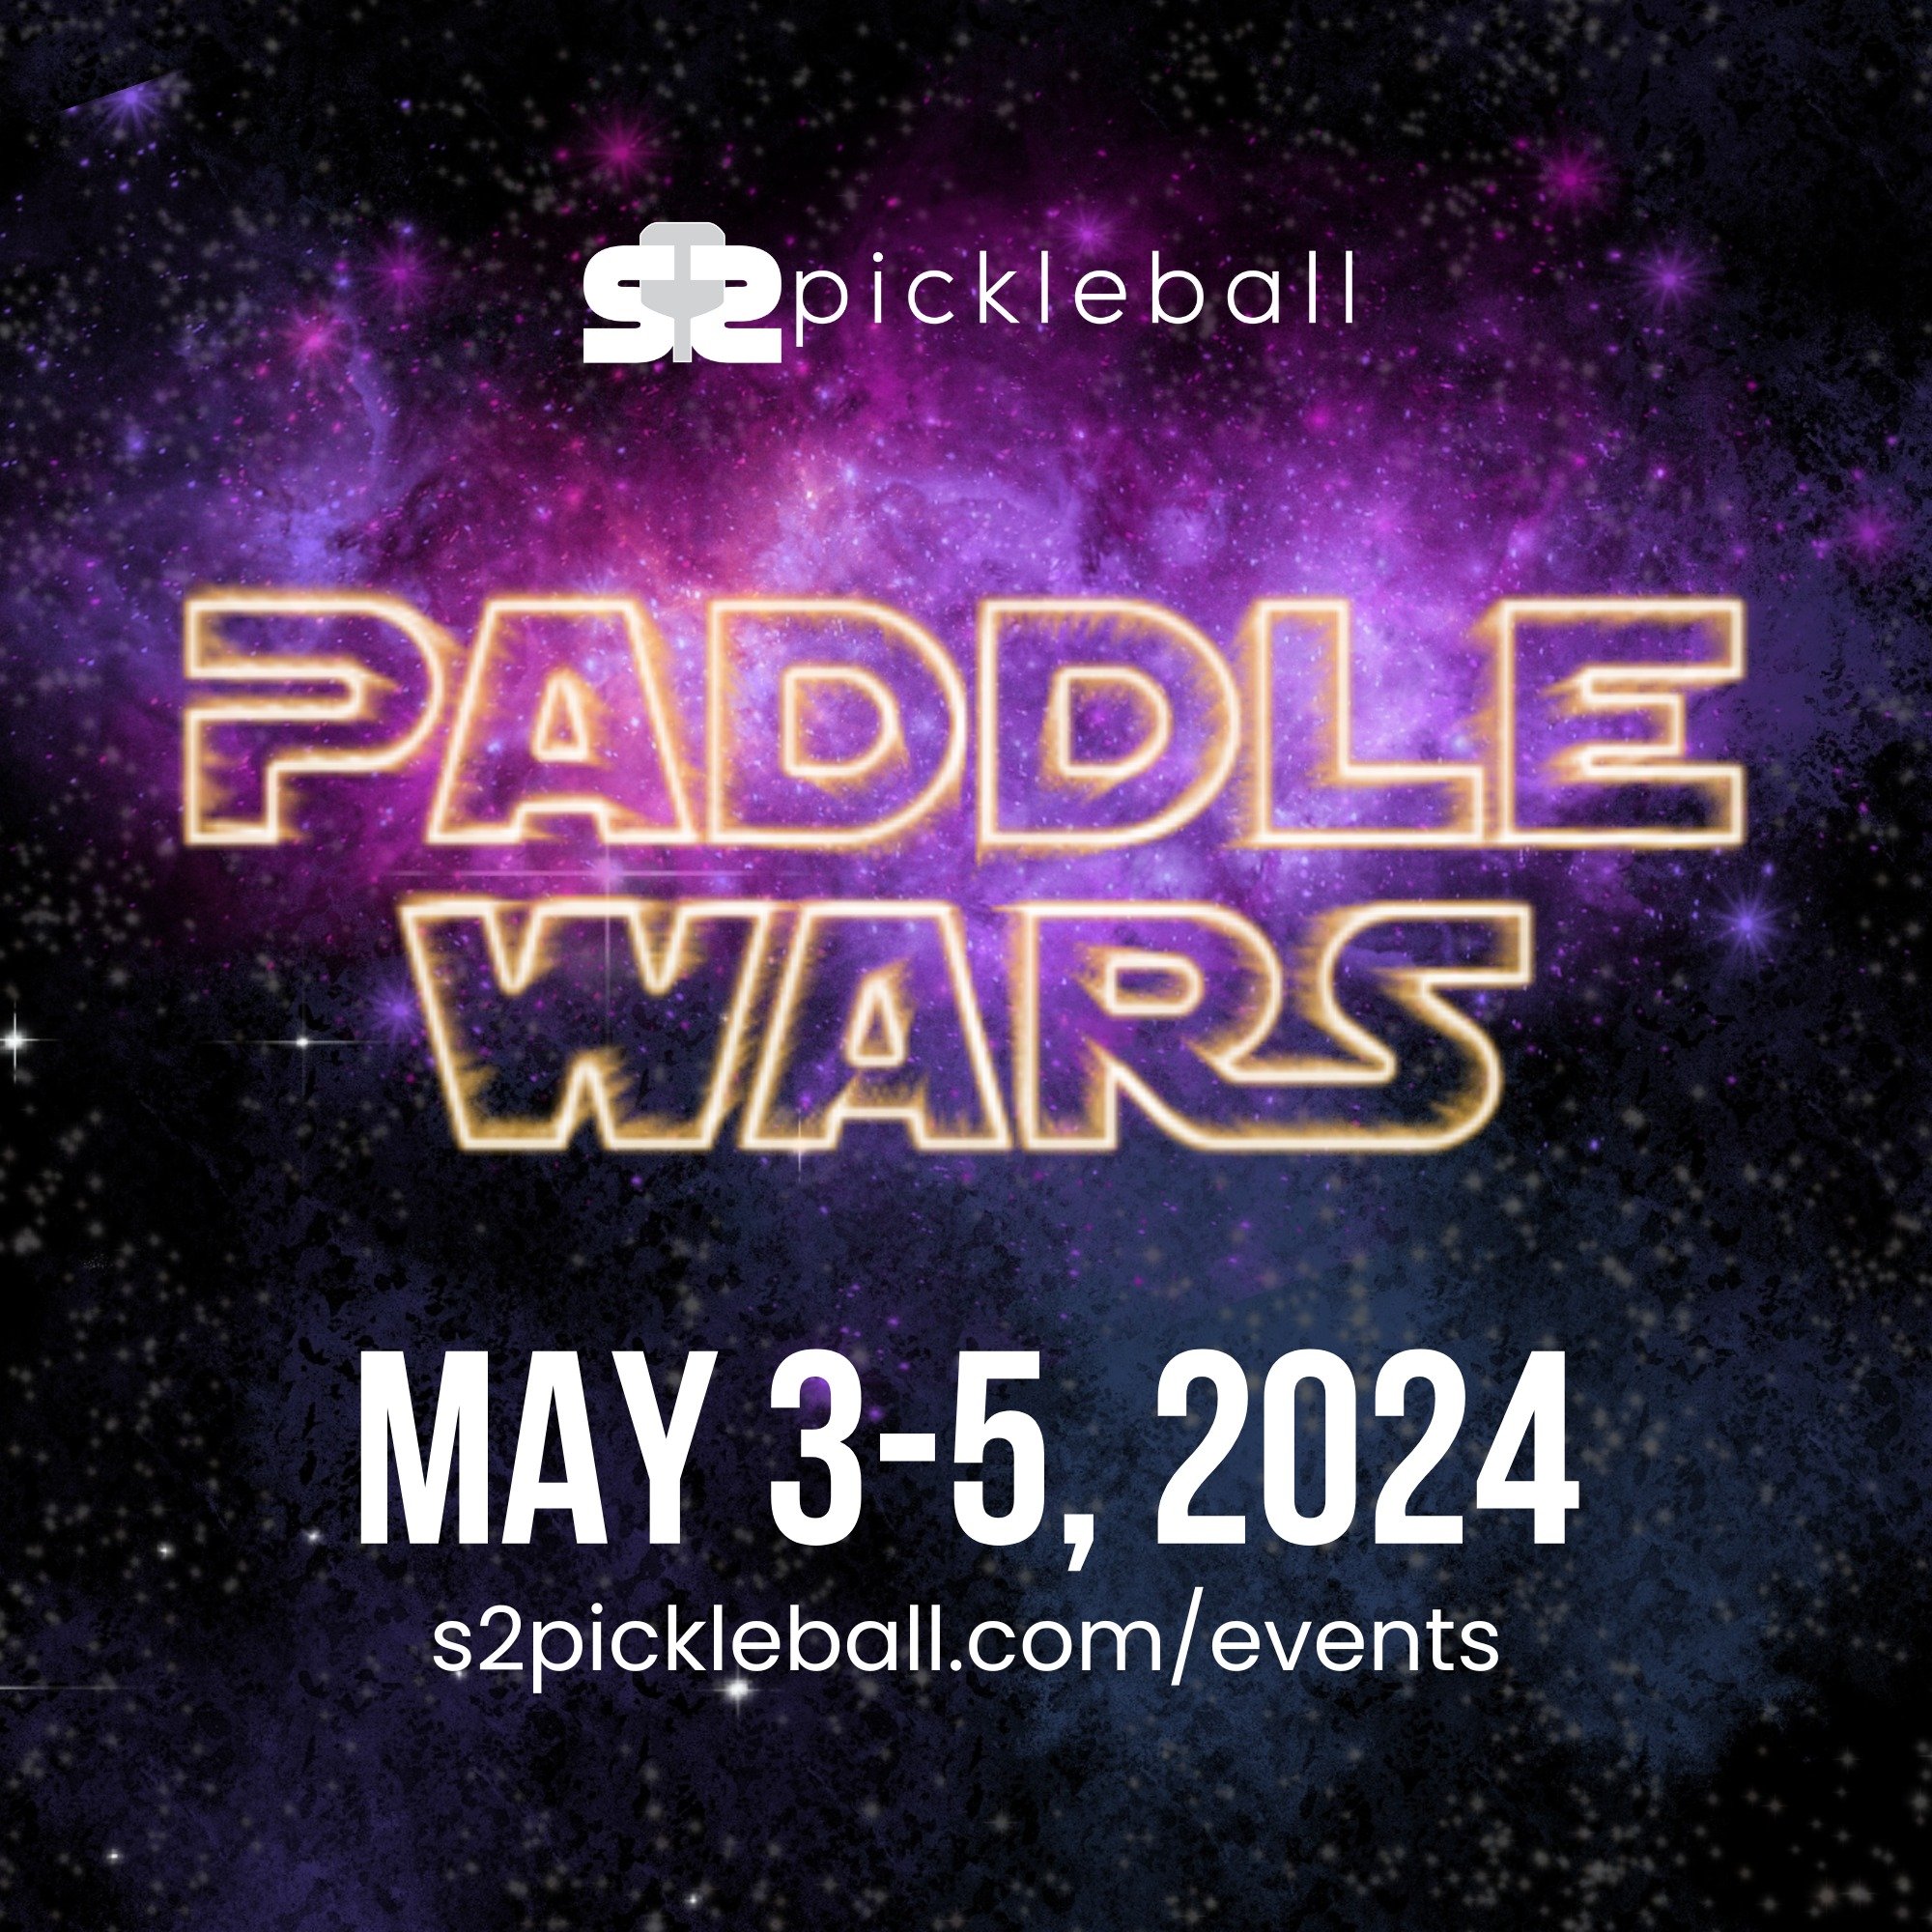 (Paddle Wars is in 10 days! Registration is still open!)
.
5/3-5/5 PADDLE WARS Tournament | we'd love to have you join us for our FIRST tournament! (Teams + Singles) 
.
May the Fourth be with you (and your partner) as you duel to 11 points in our rou